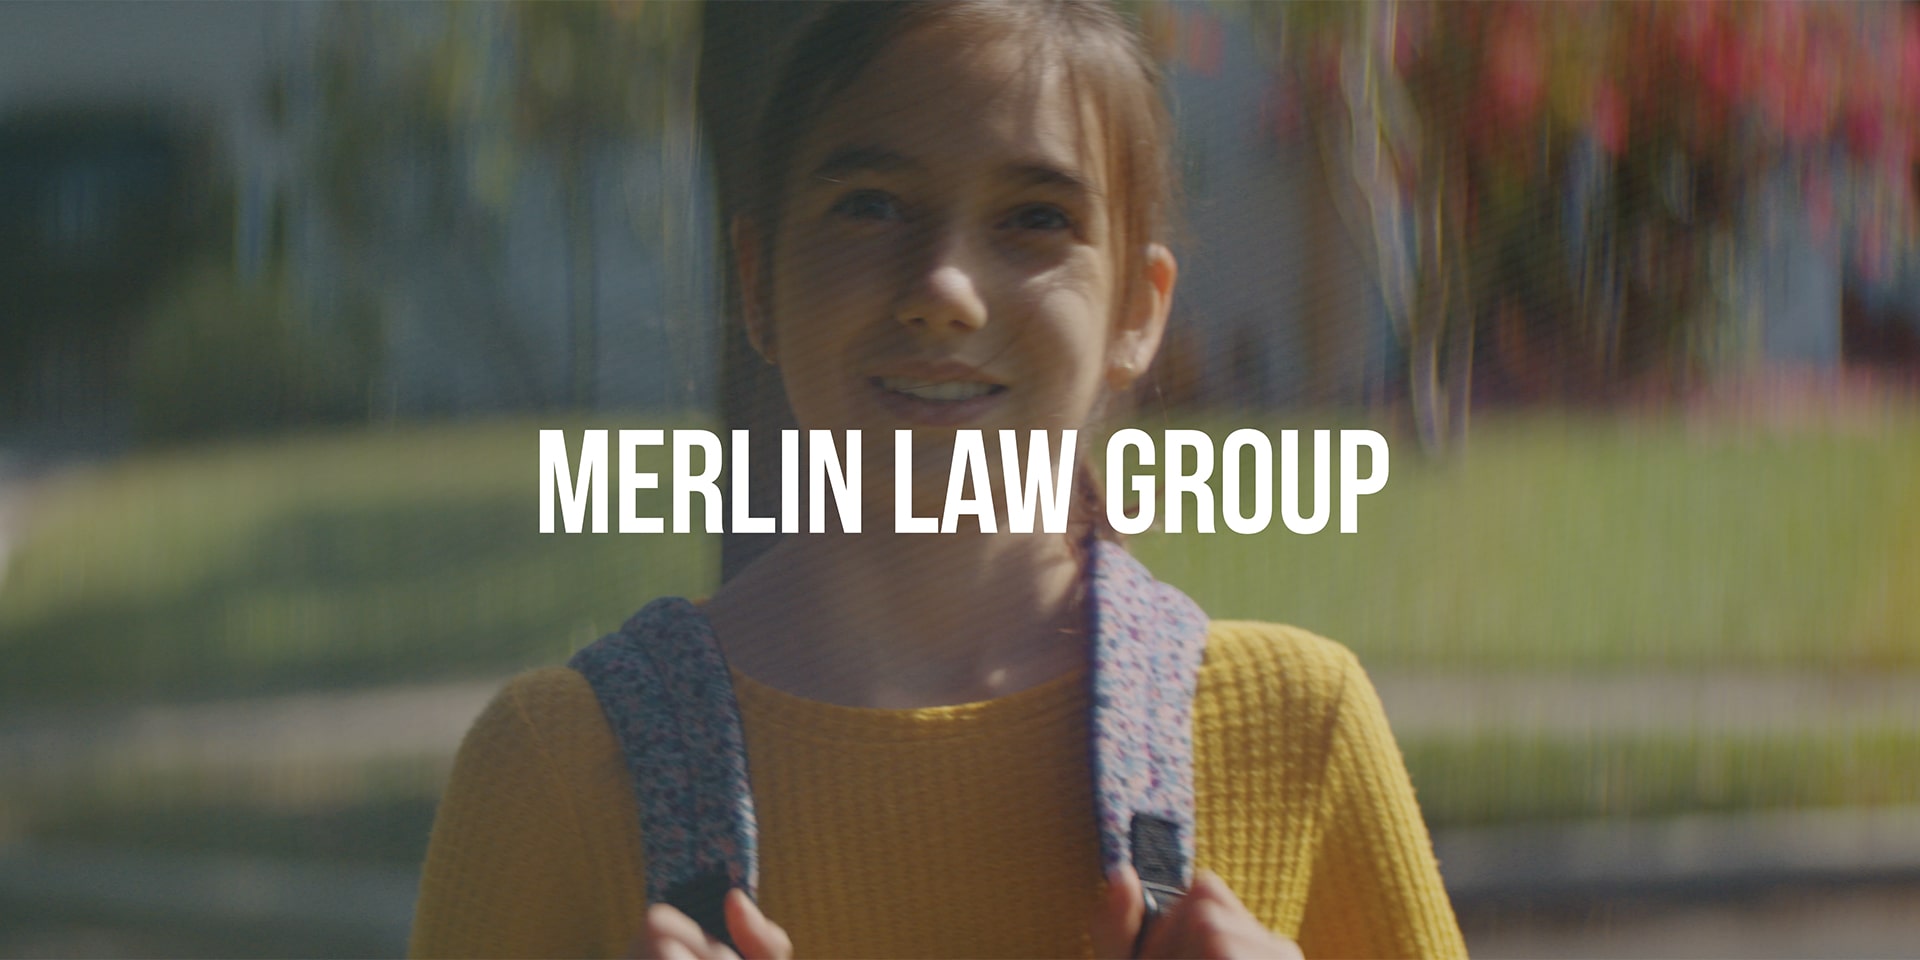 Merlin Law Group 'Home'